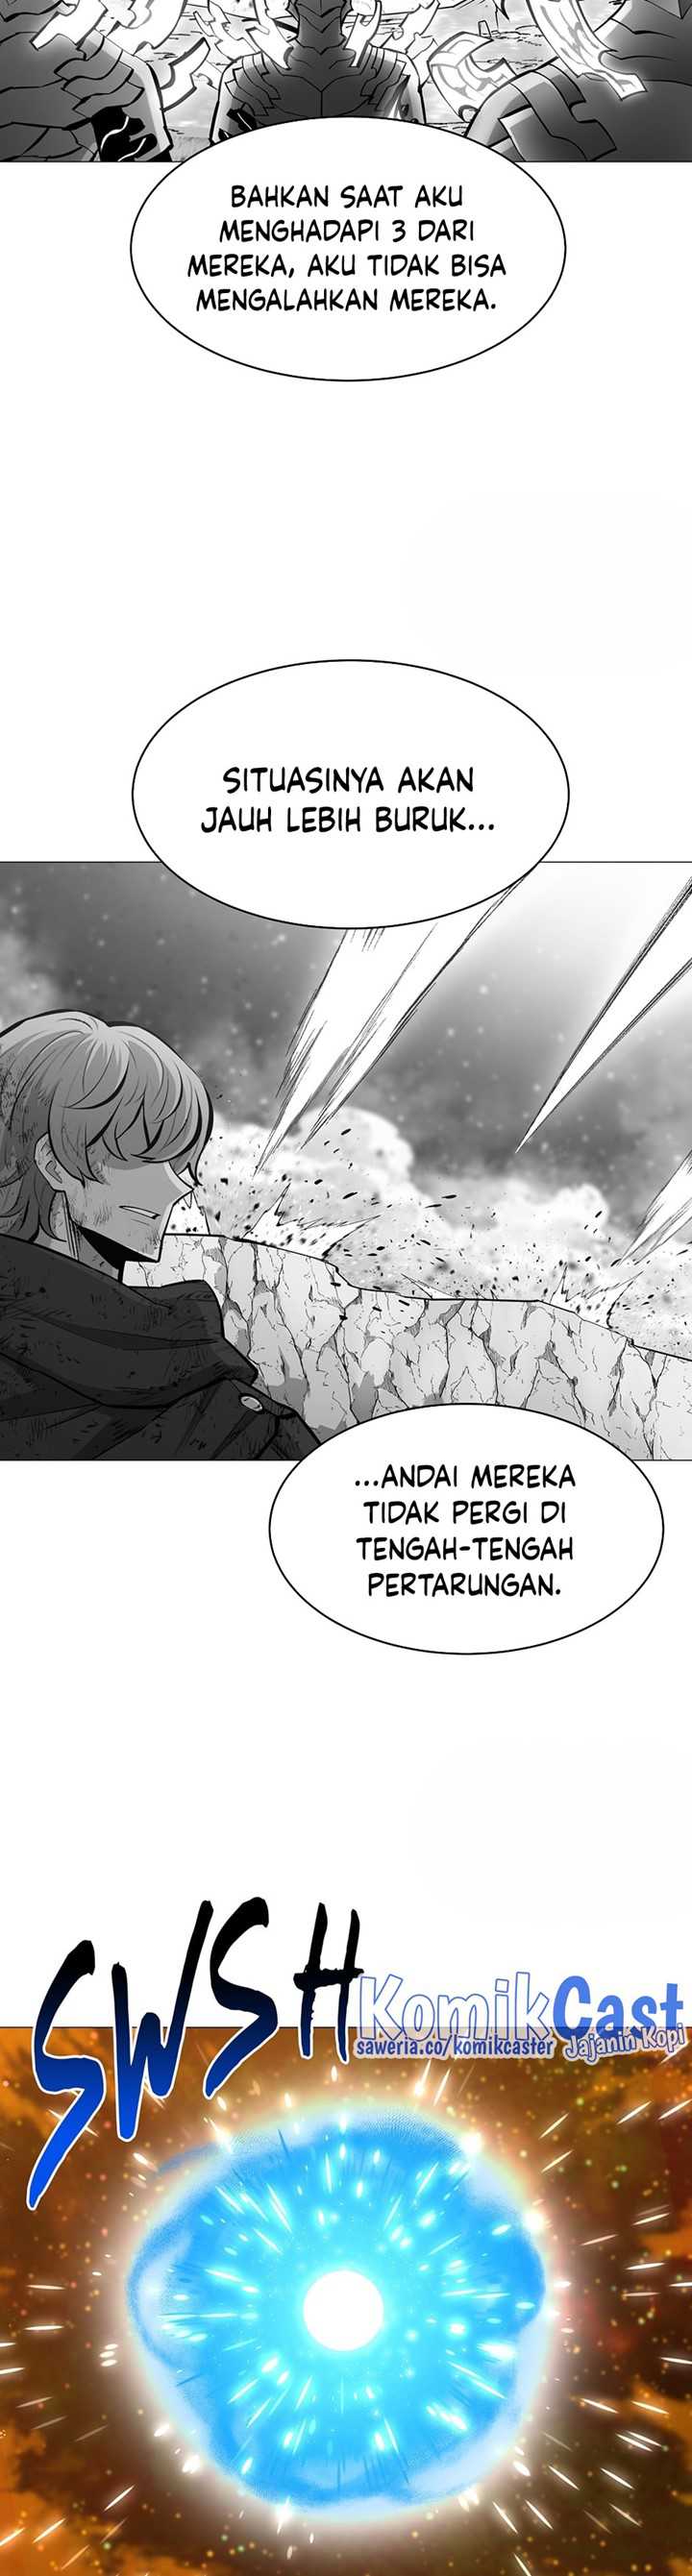 Updater Chapter 114